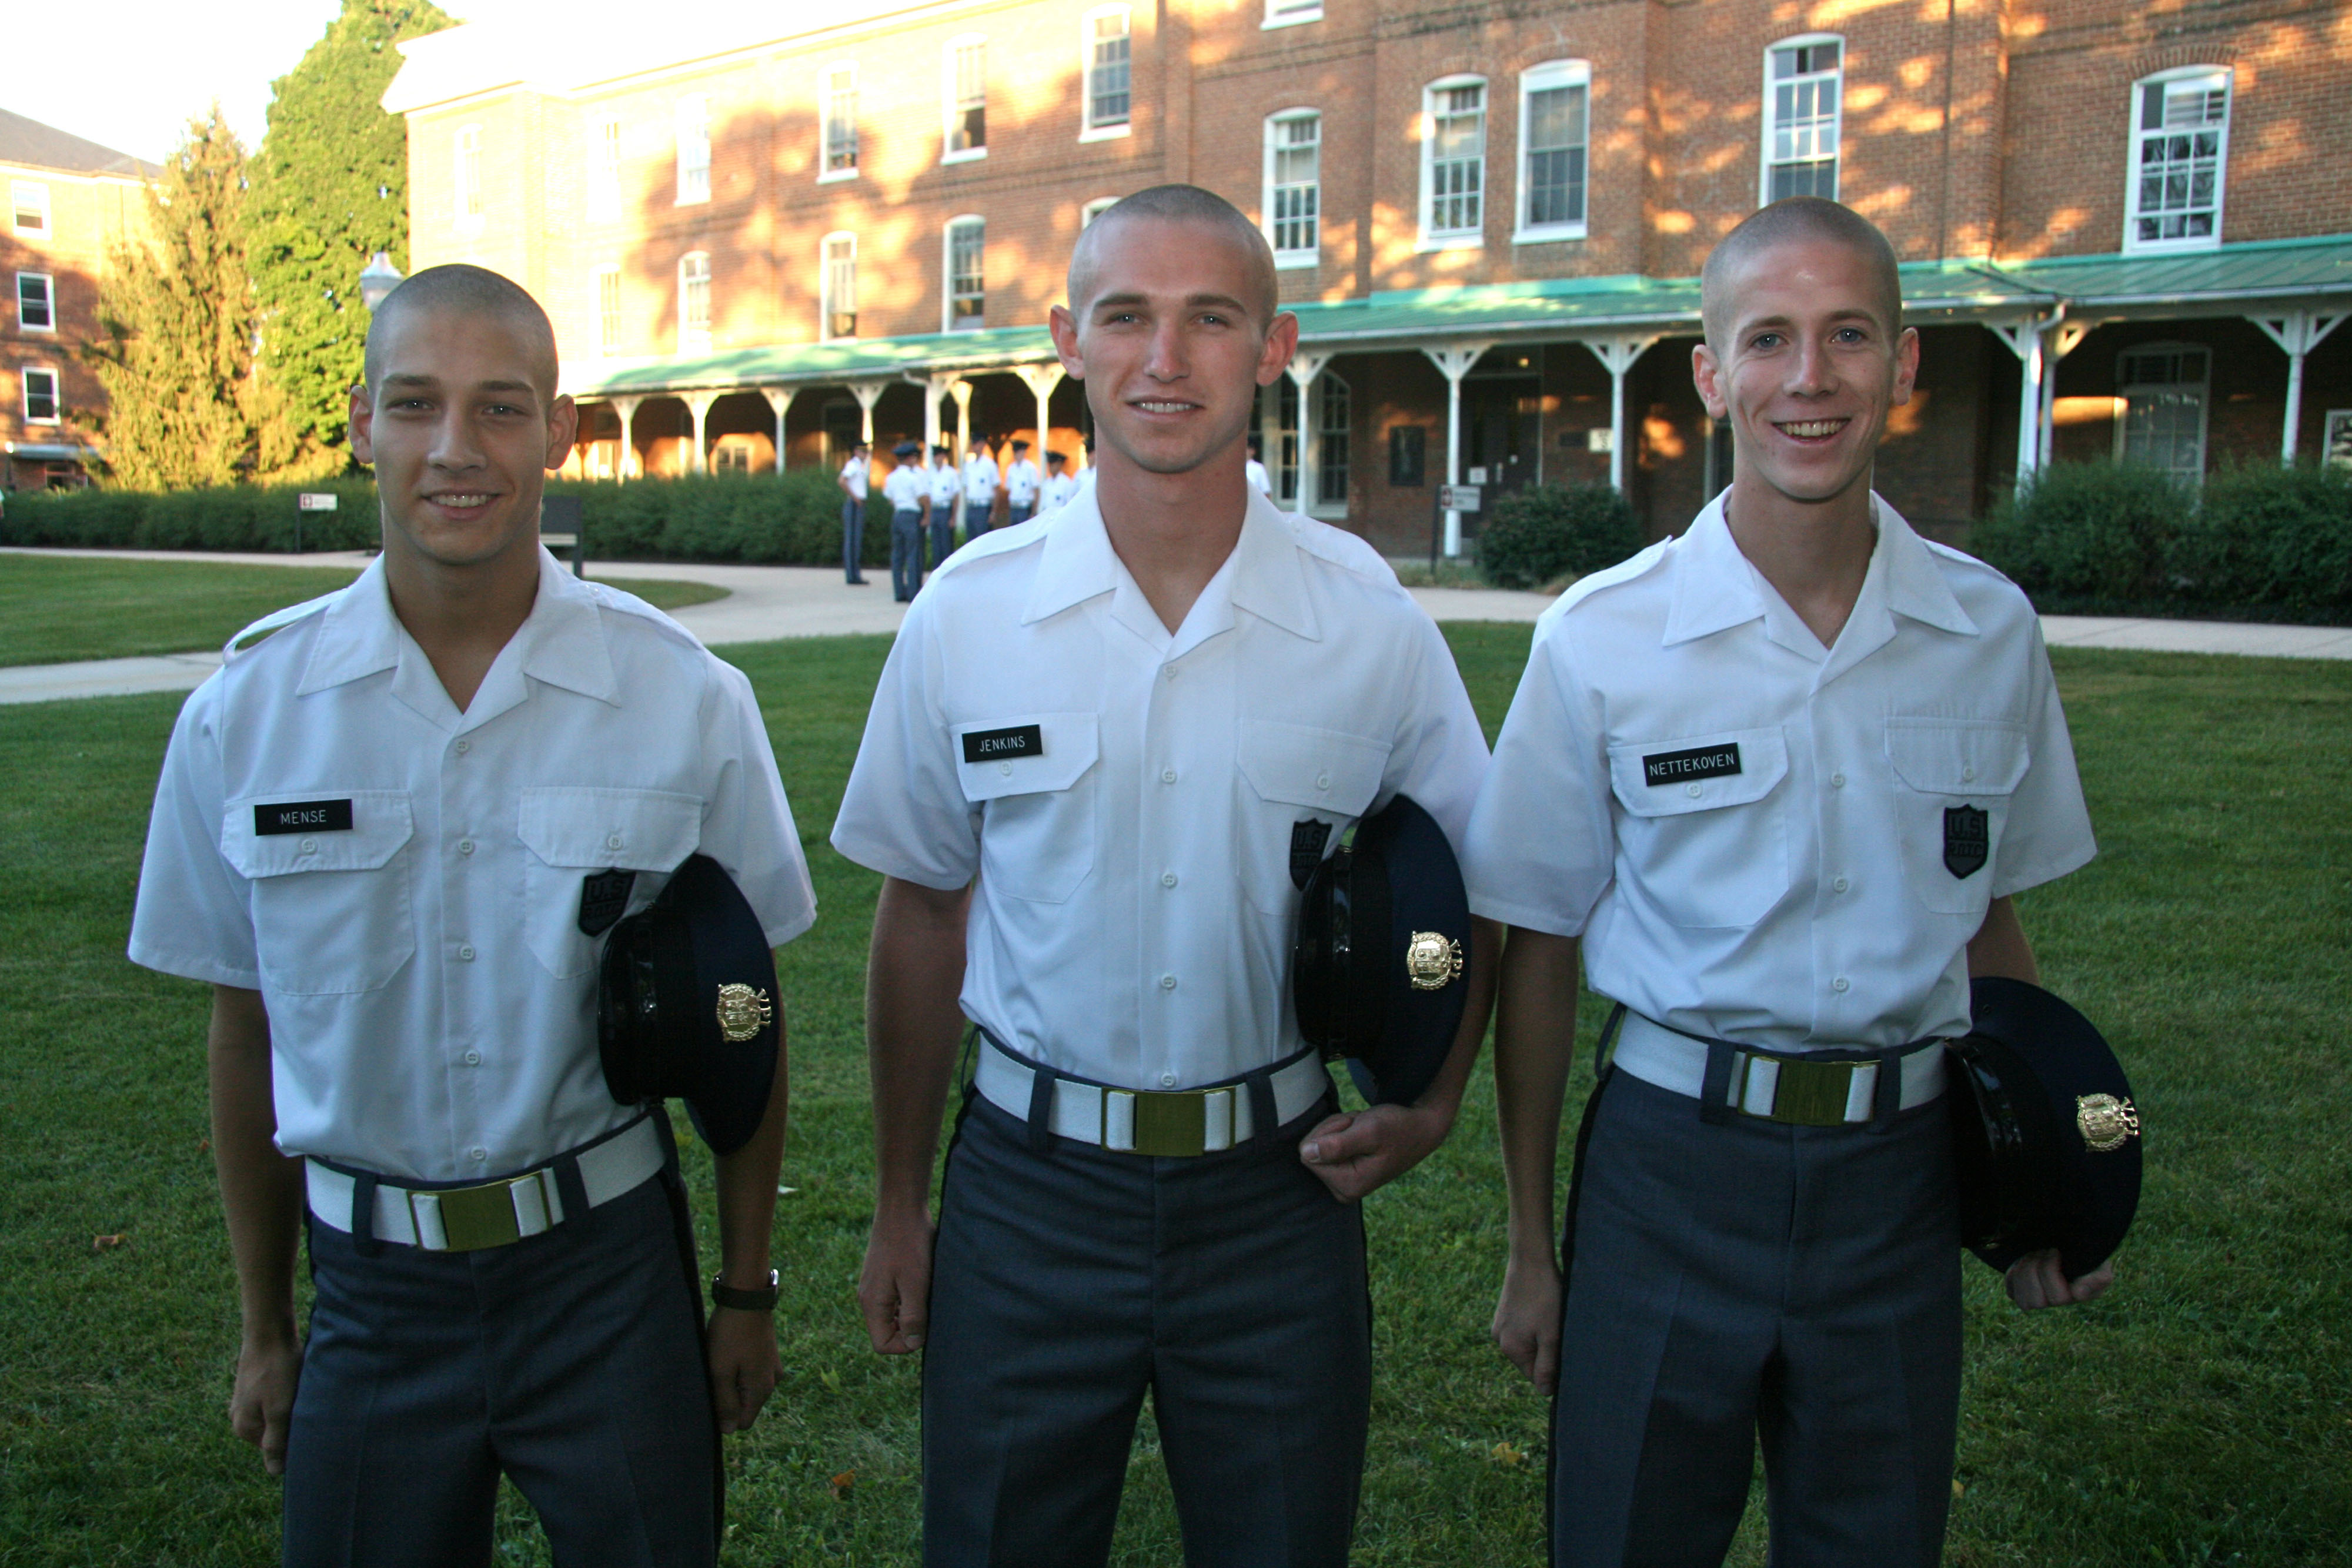 From left to right are Cadets Hunter Mense, Andrew Jenkins, and Peter Nettekoven